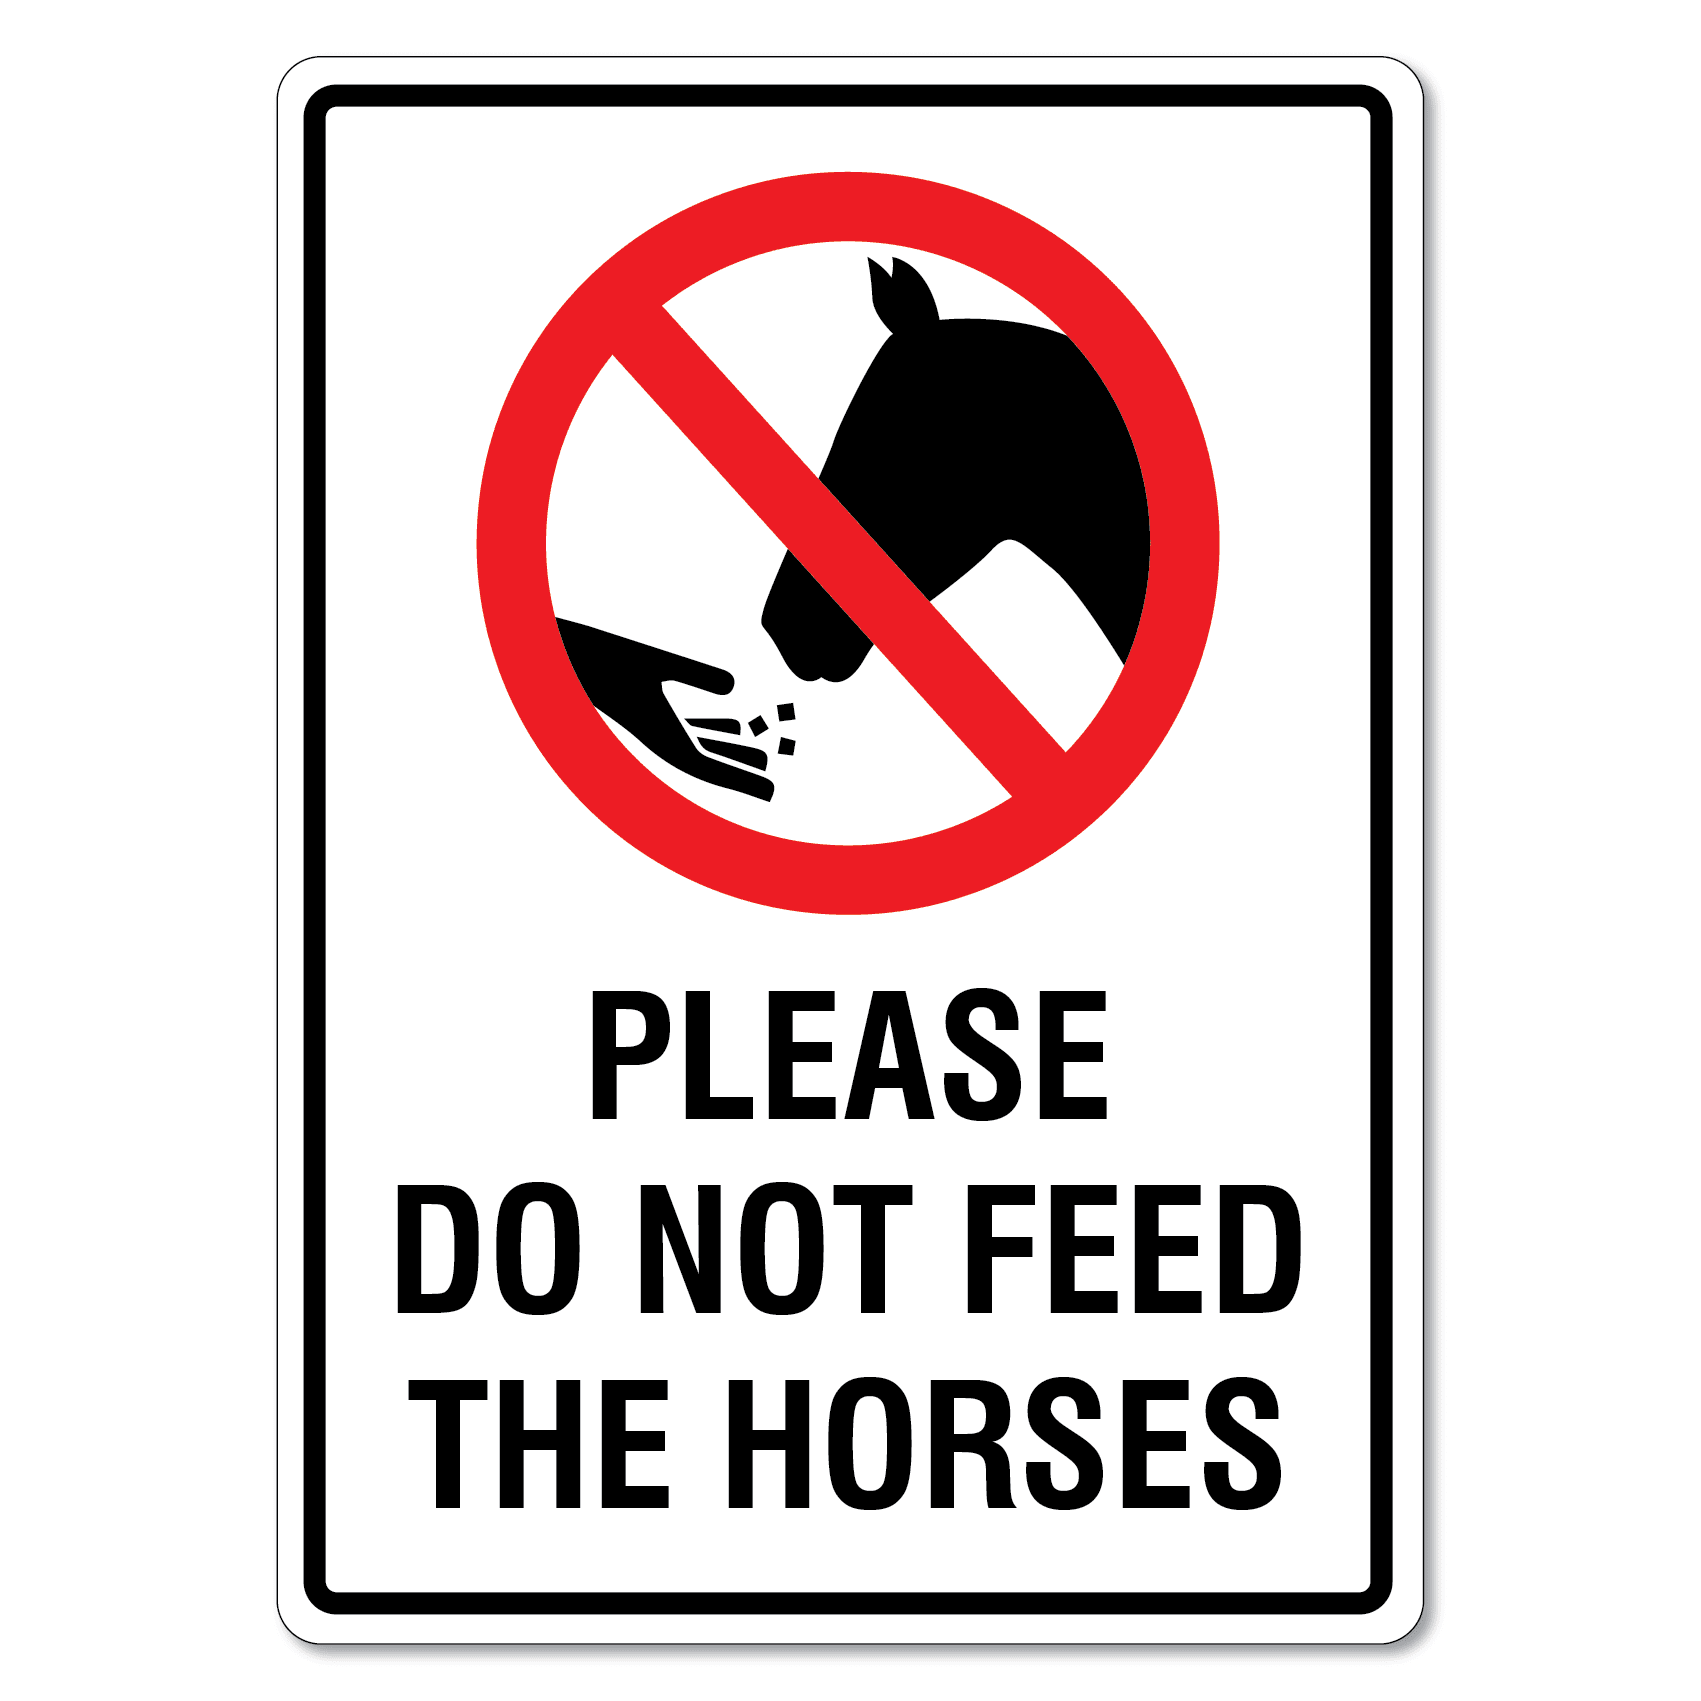 Animals please. Please do not Feed the animals. Please do not Feed the animals знак. Do not Feed the animals sign. Please do not.